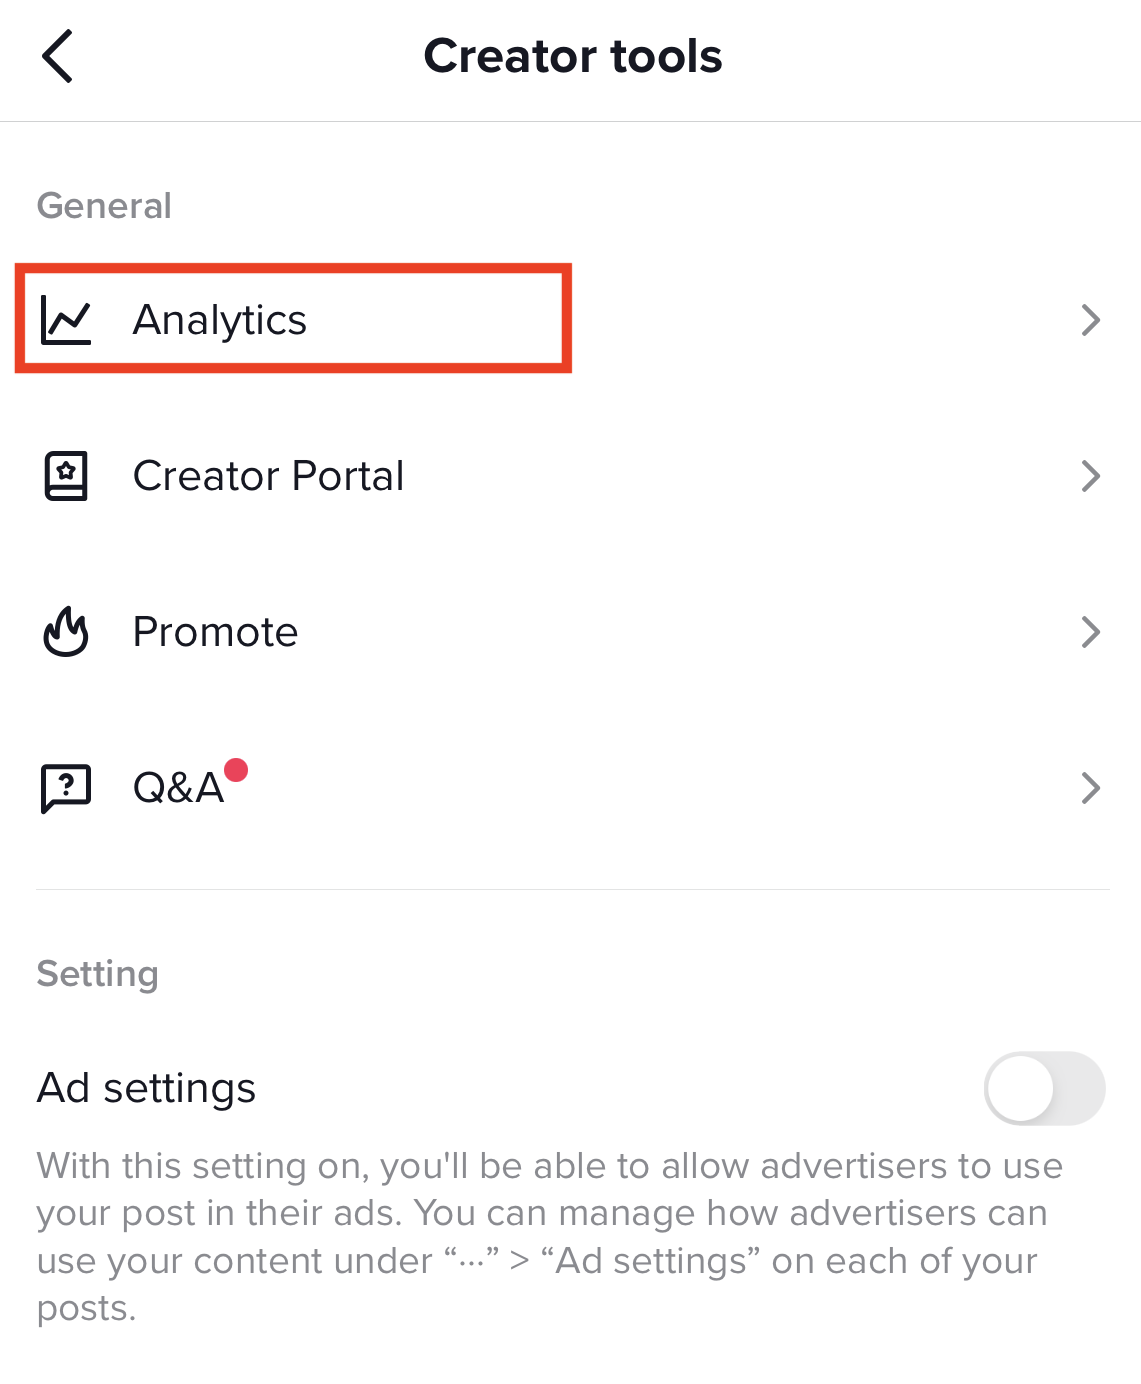 TikTok's creator tools, which features these sections: Analytics, Creator Portal, Promote and Q&A. The Analytic sections is highlighted with a red box. 